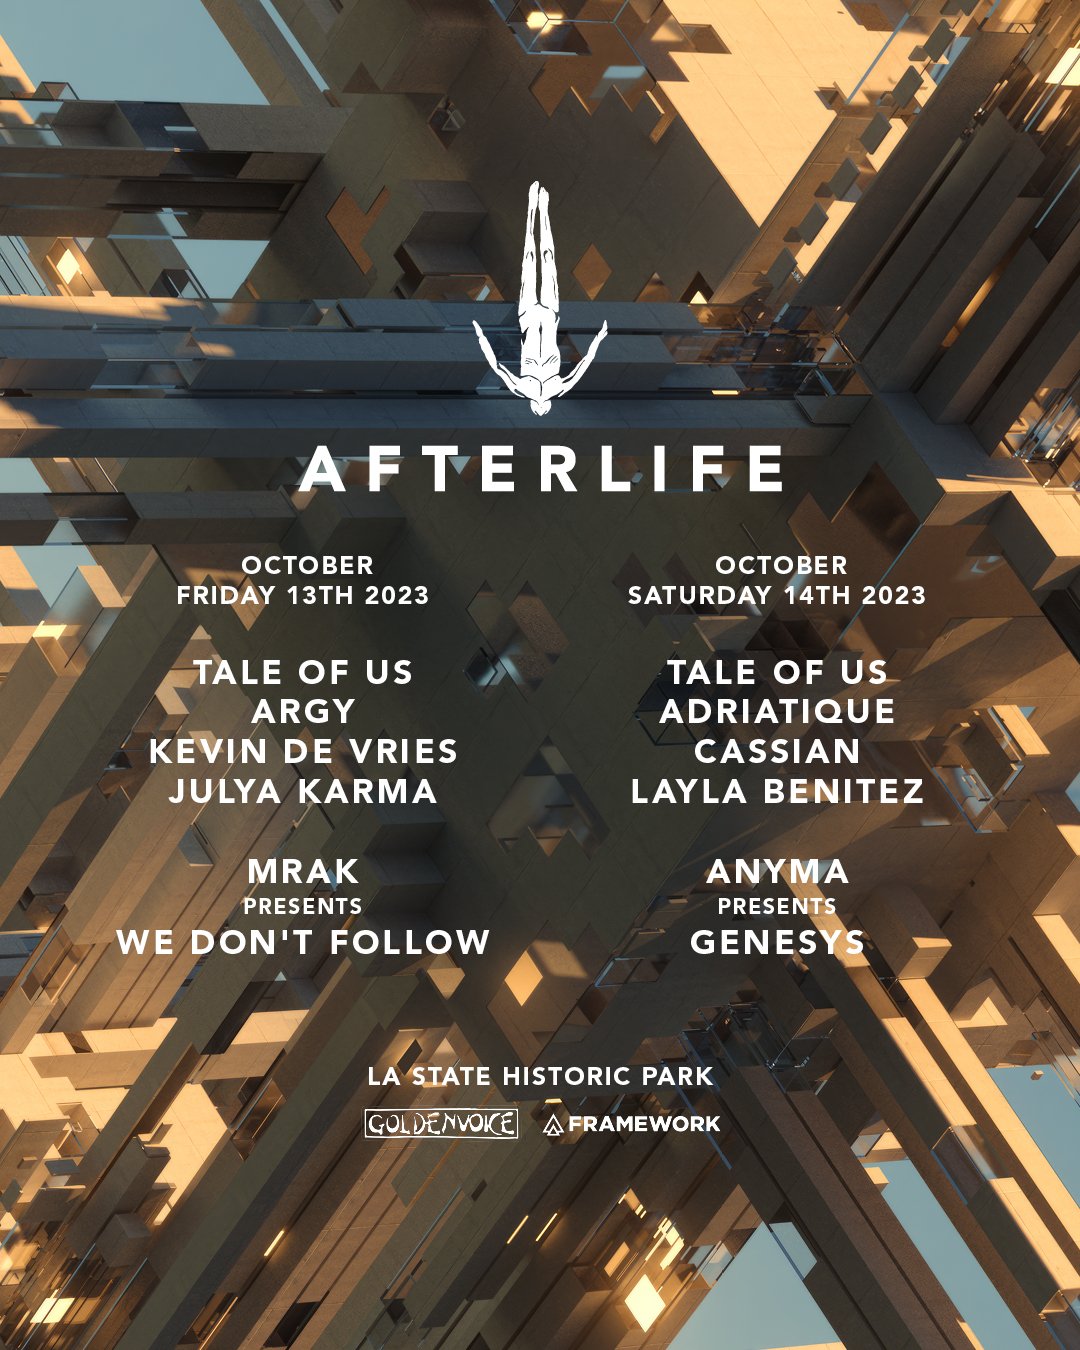 Afterlife takes over Latin America with upcoming tour